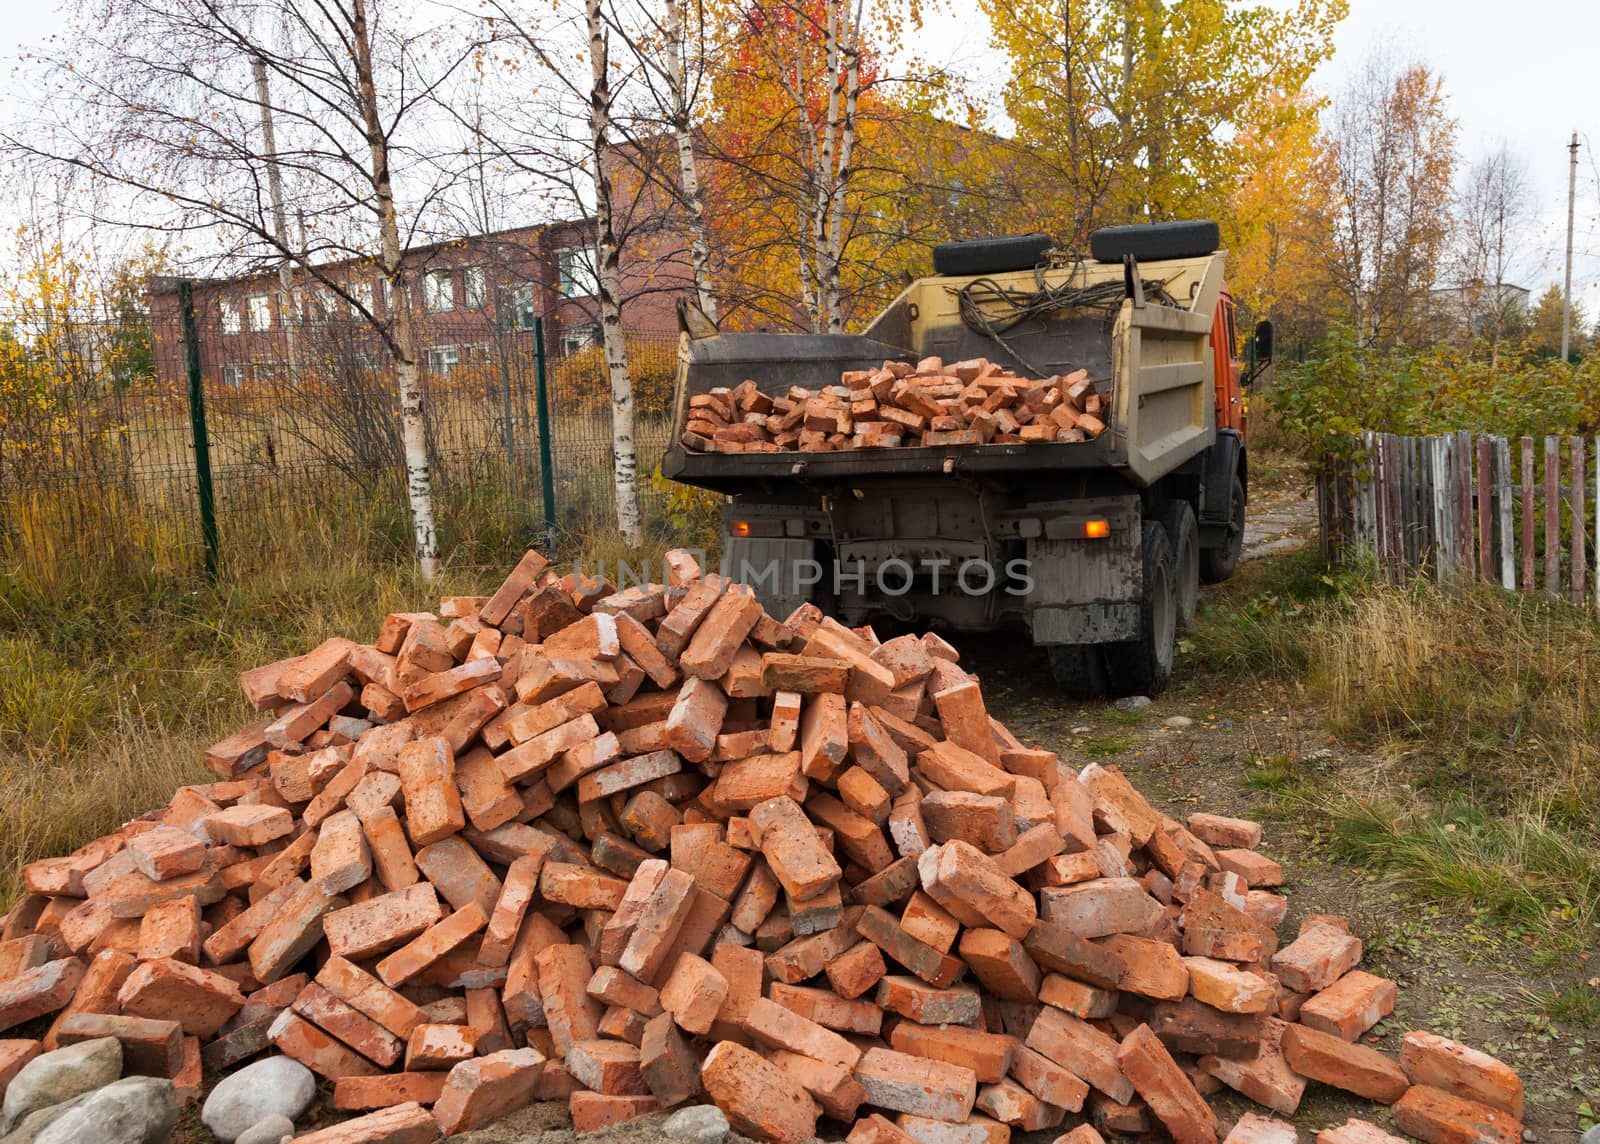 Tipper brought  a lot of red bricks for construction